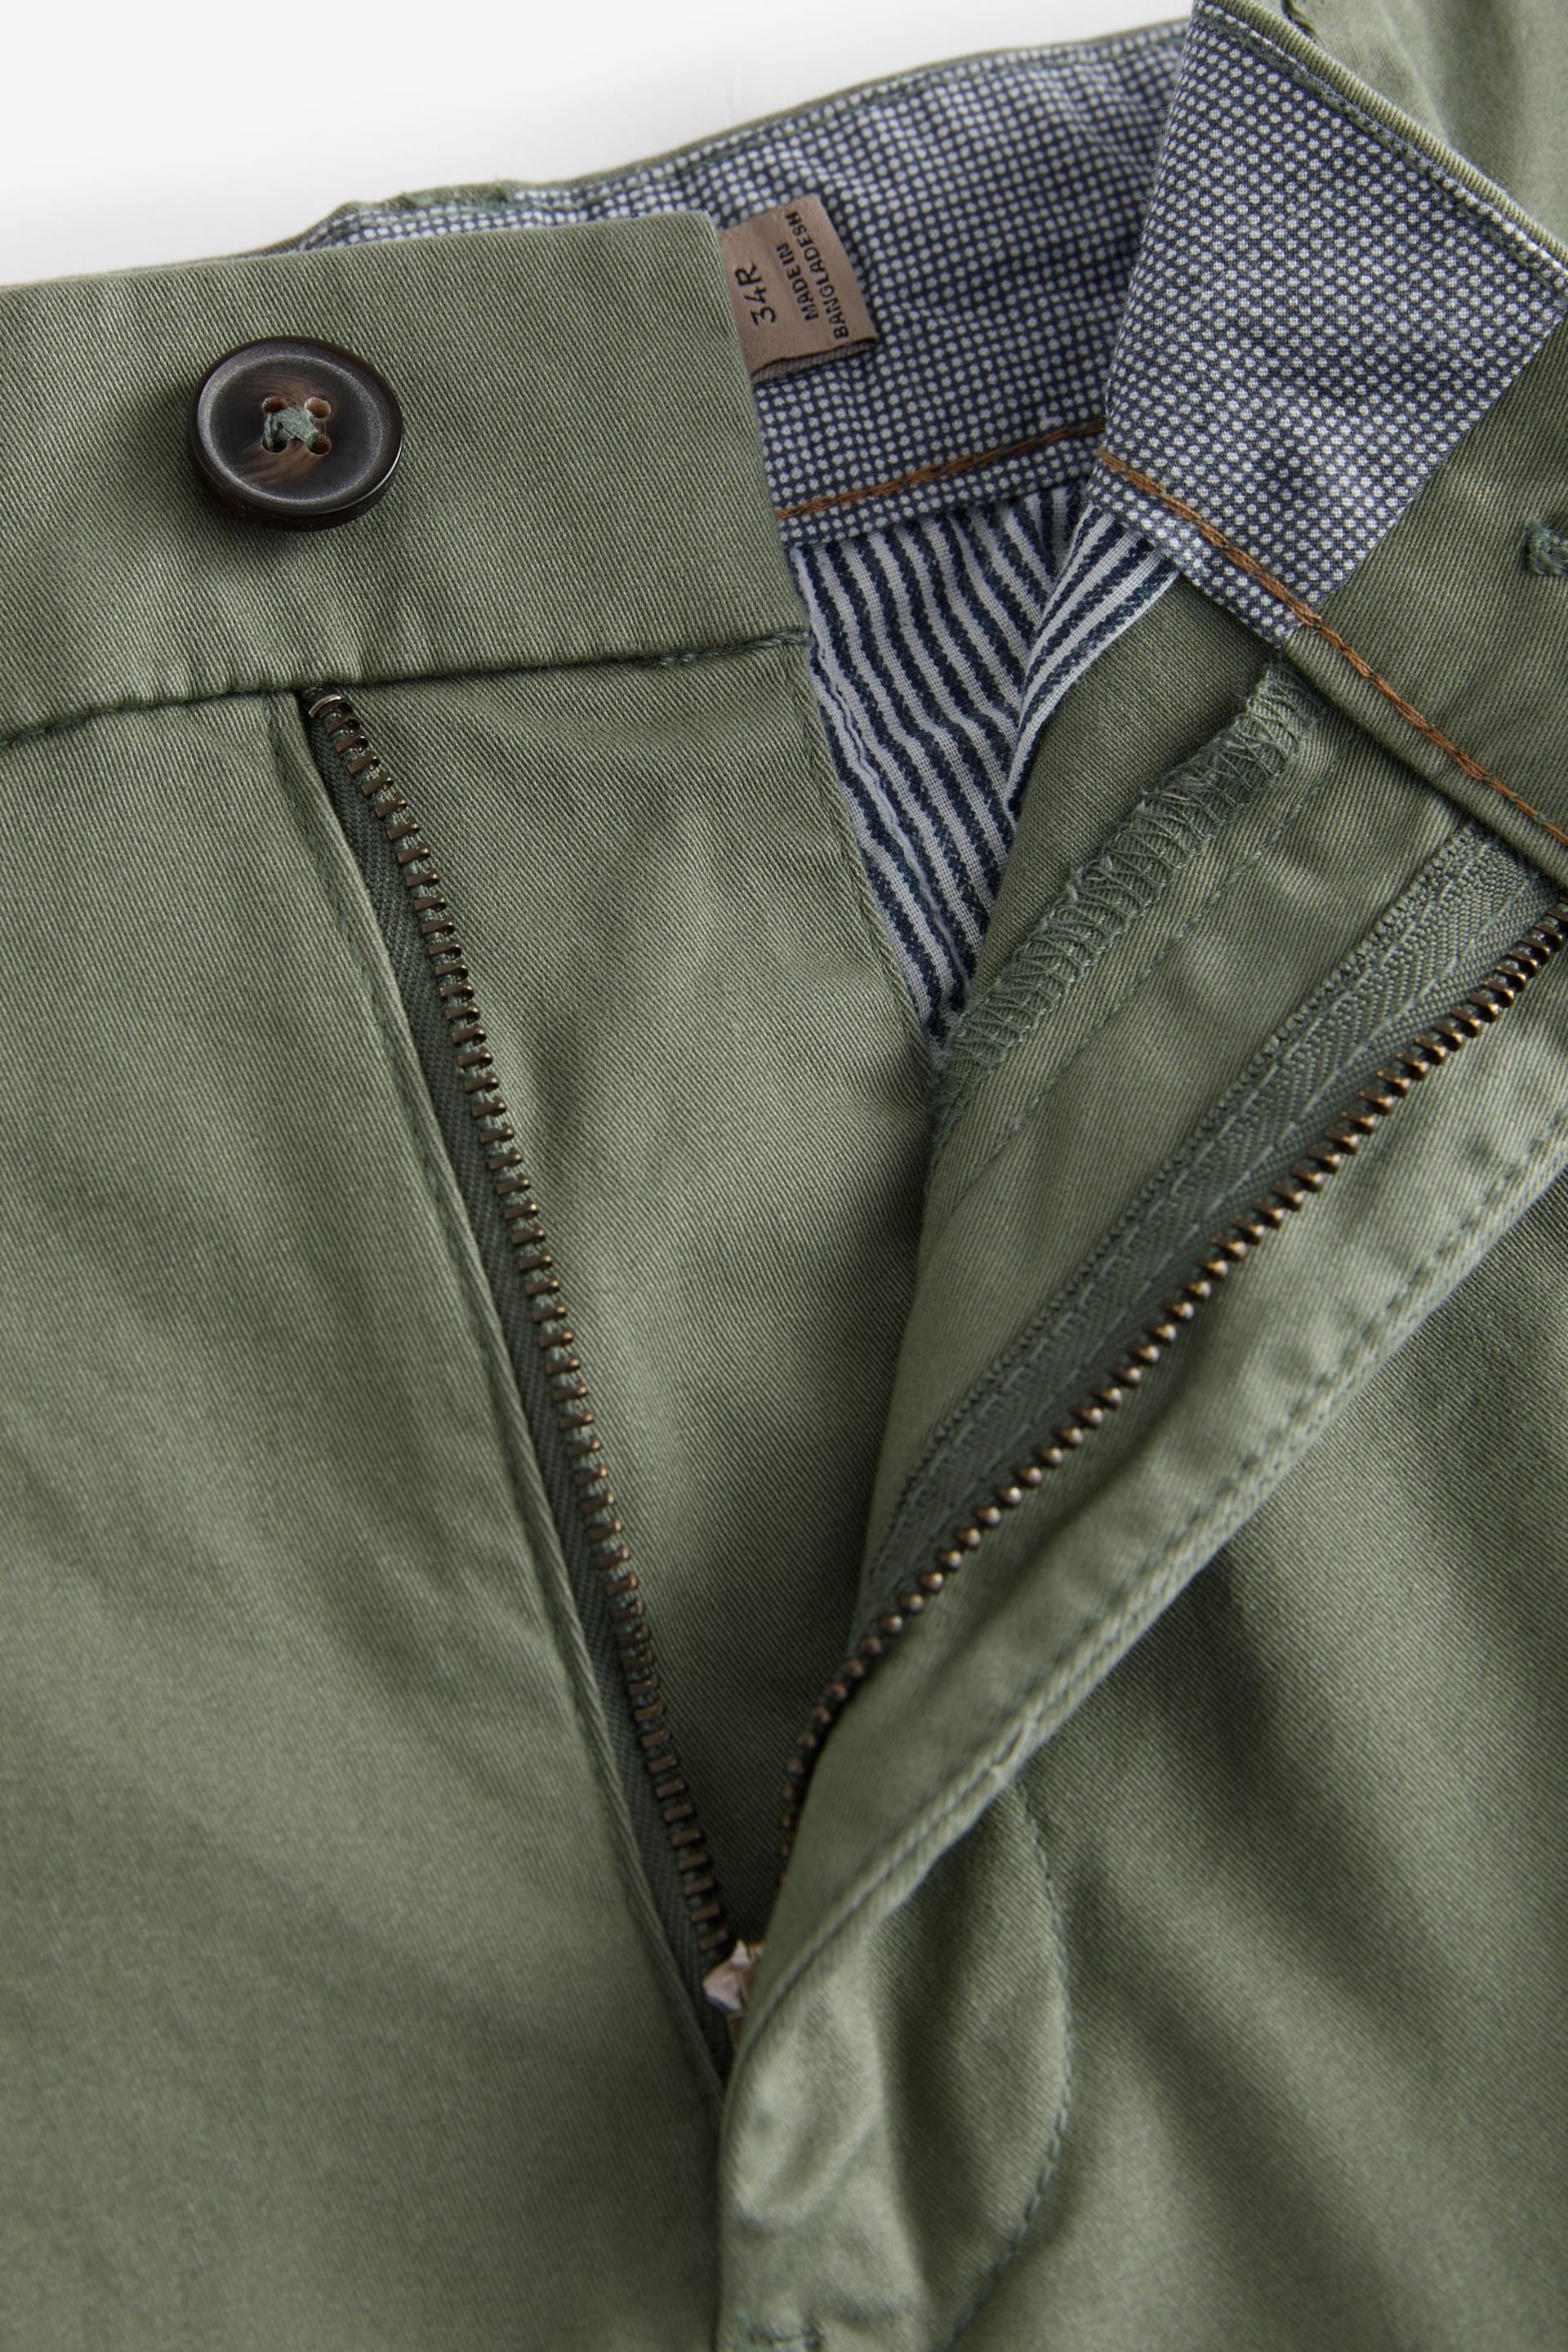 Sage Green Loose Fit Stretch Chinos Shorts - Image 6 of 8